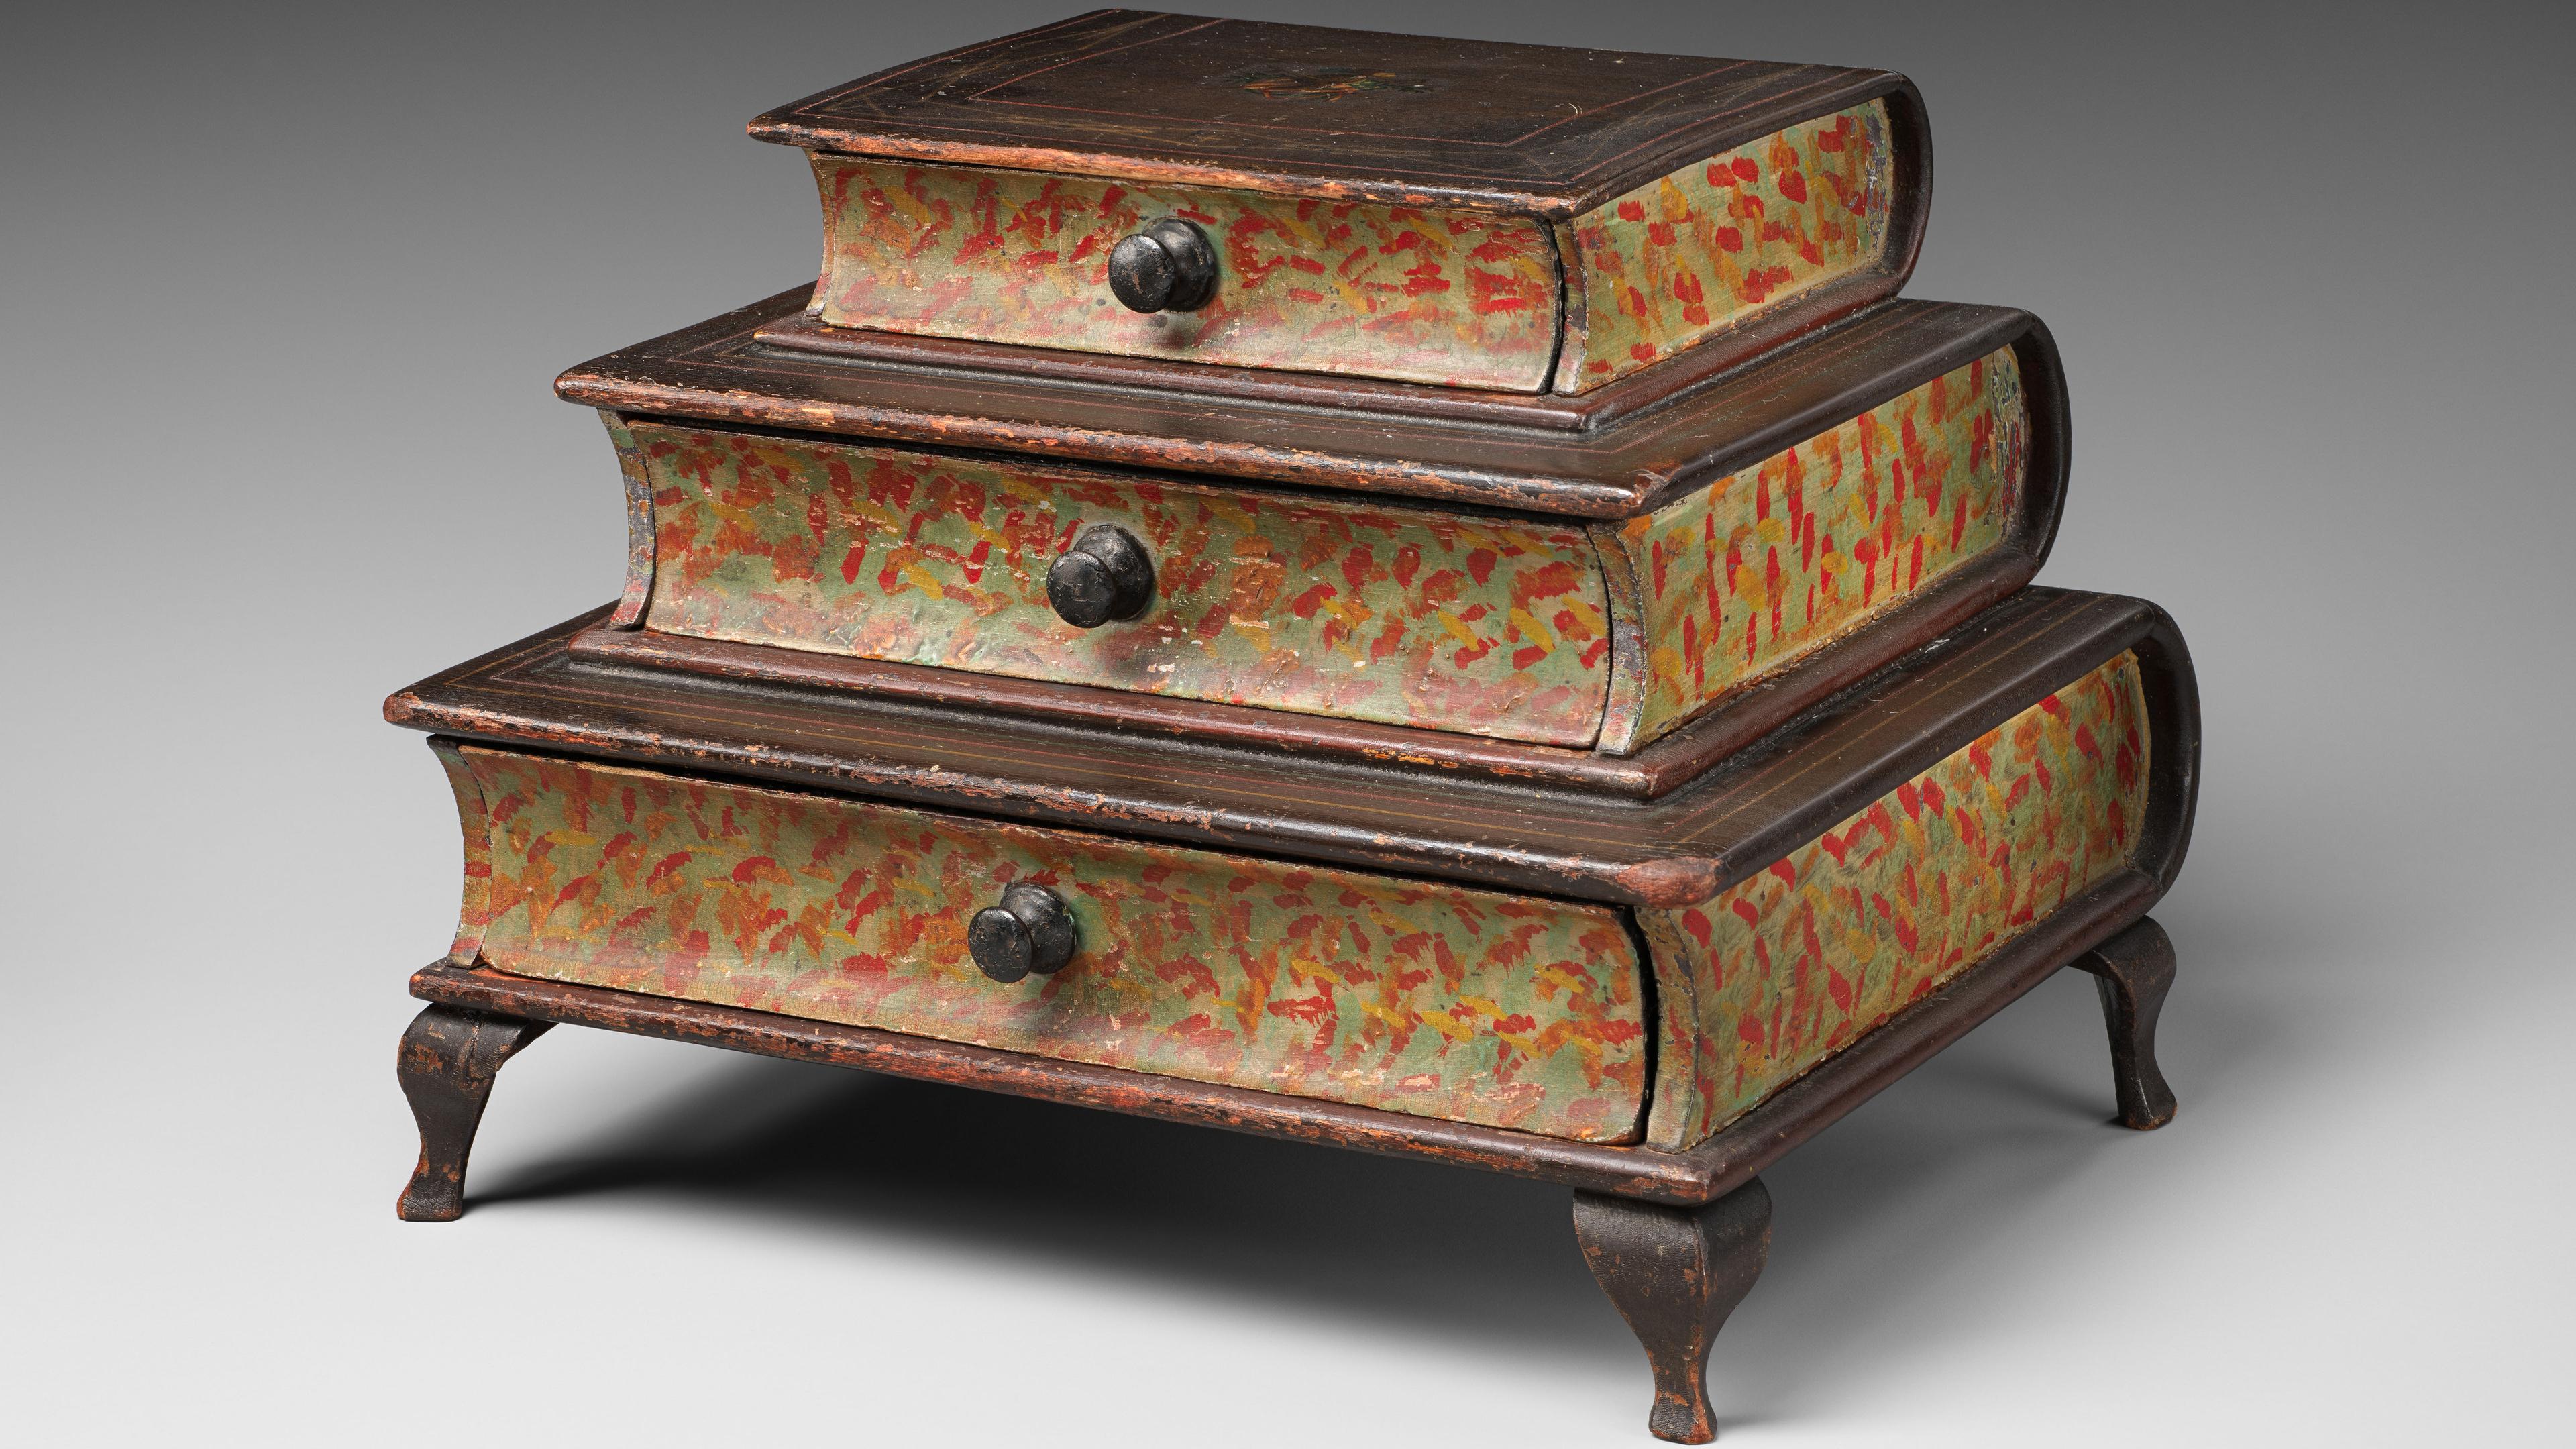 A set of three antique, graduated, stackable wooden boxes, each with a curved lid, painted in a distressed red with faint foliage motifs, featuring a central metal pull handle, resting on small, stylized feet.